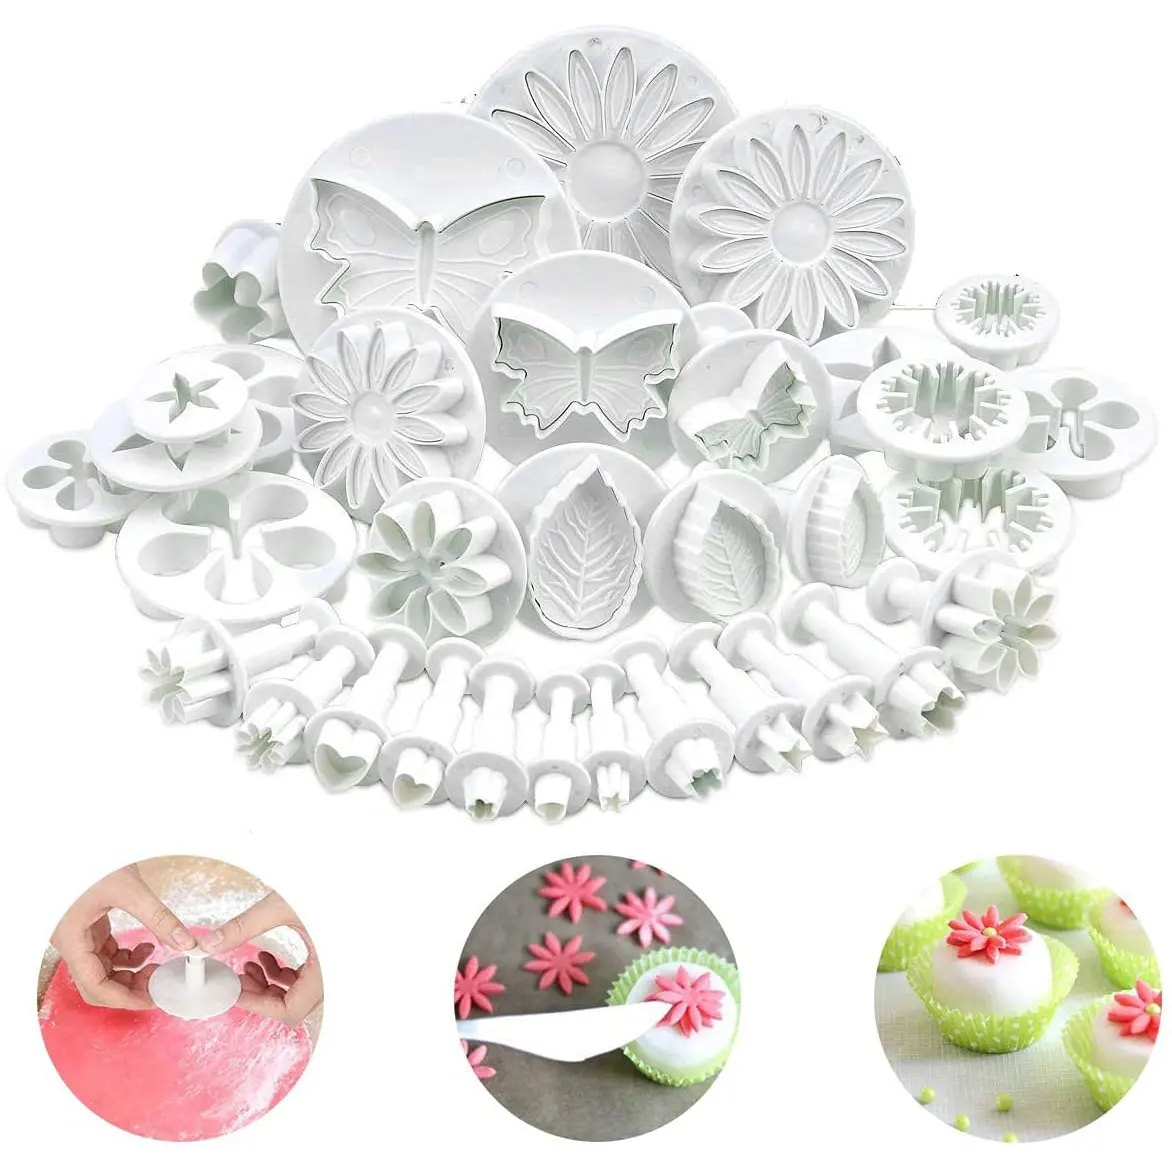 33 Piece Fondant Cake Cookie Plunger Cutter Sugarcraft Flower Leaf Butterfly Heart Shape Decorating Mold DIY Tools Moulds